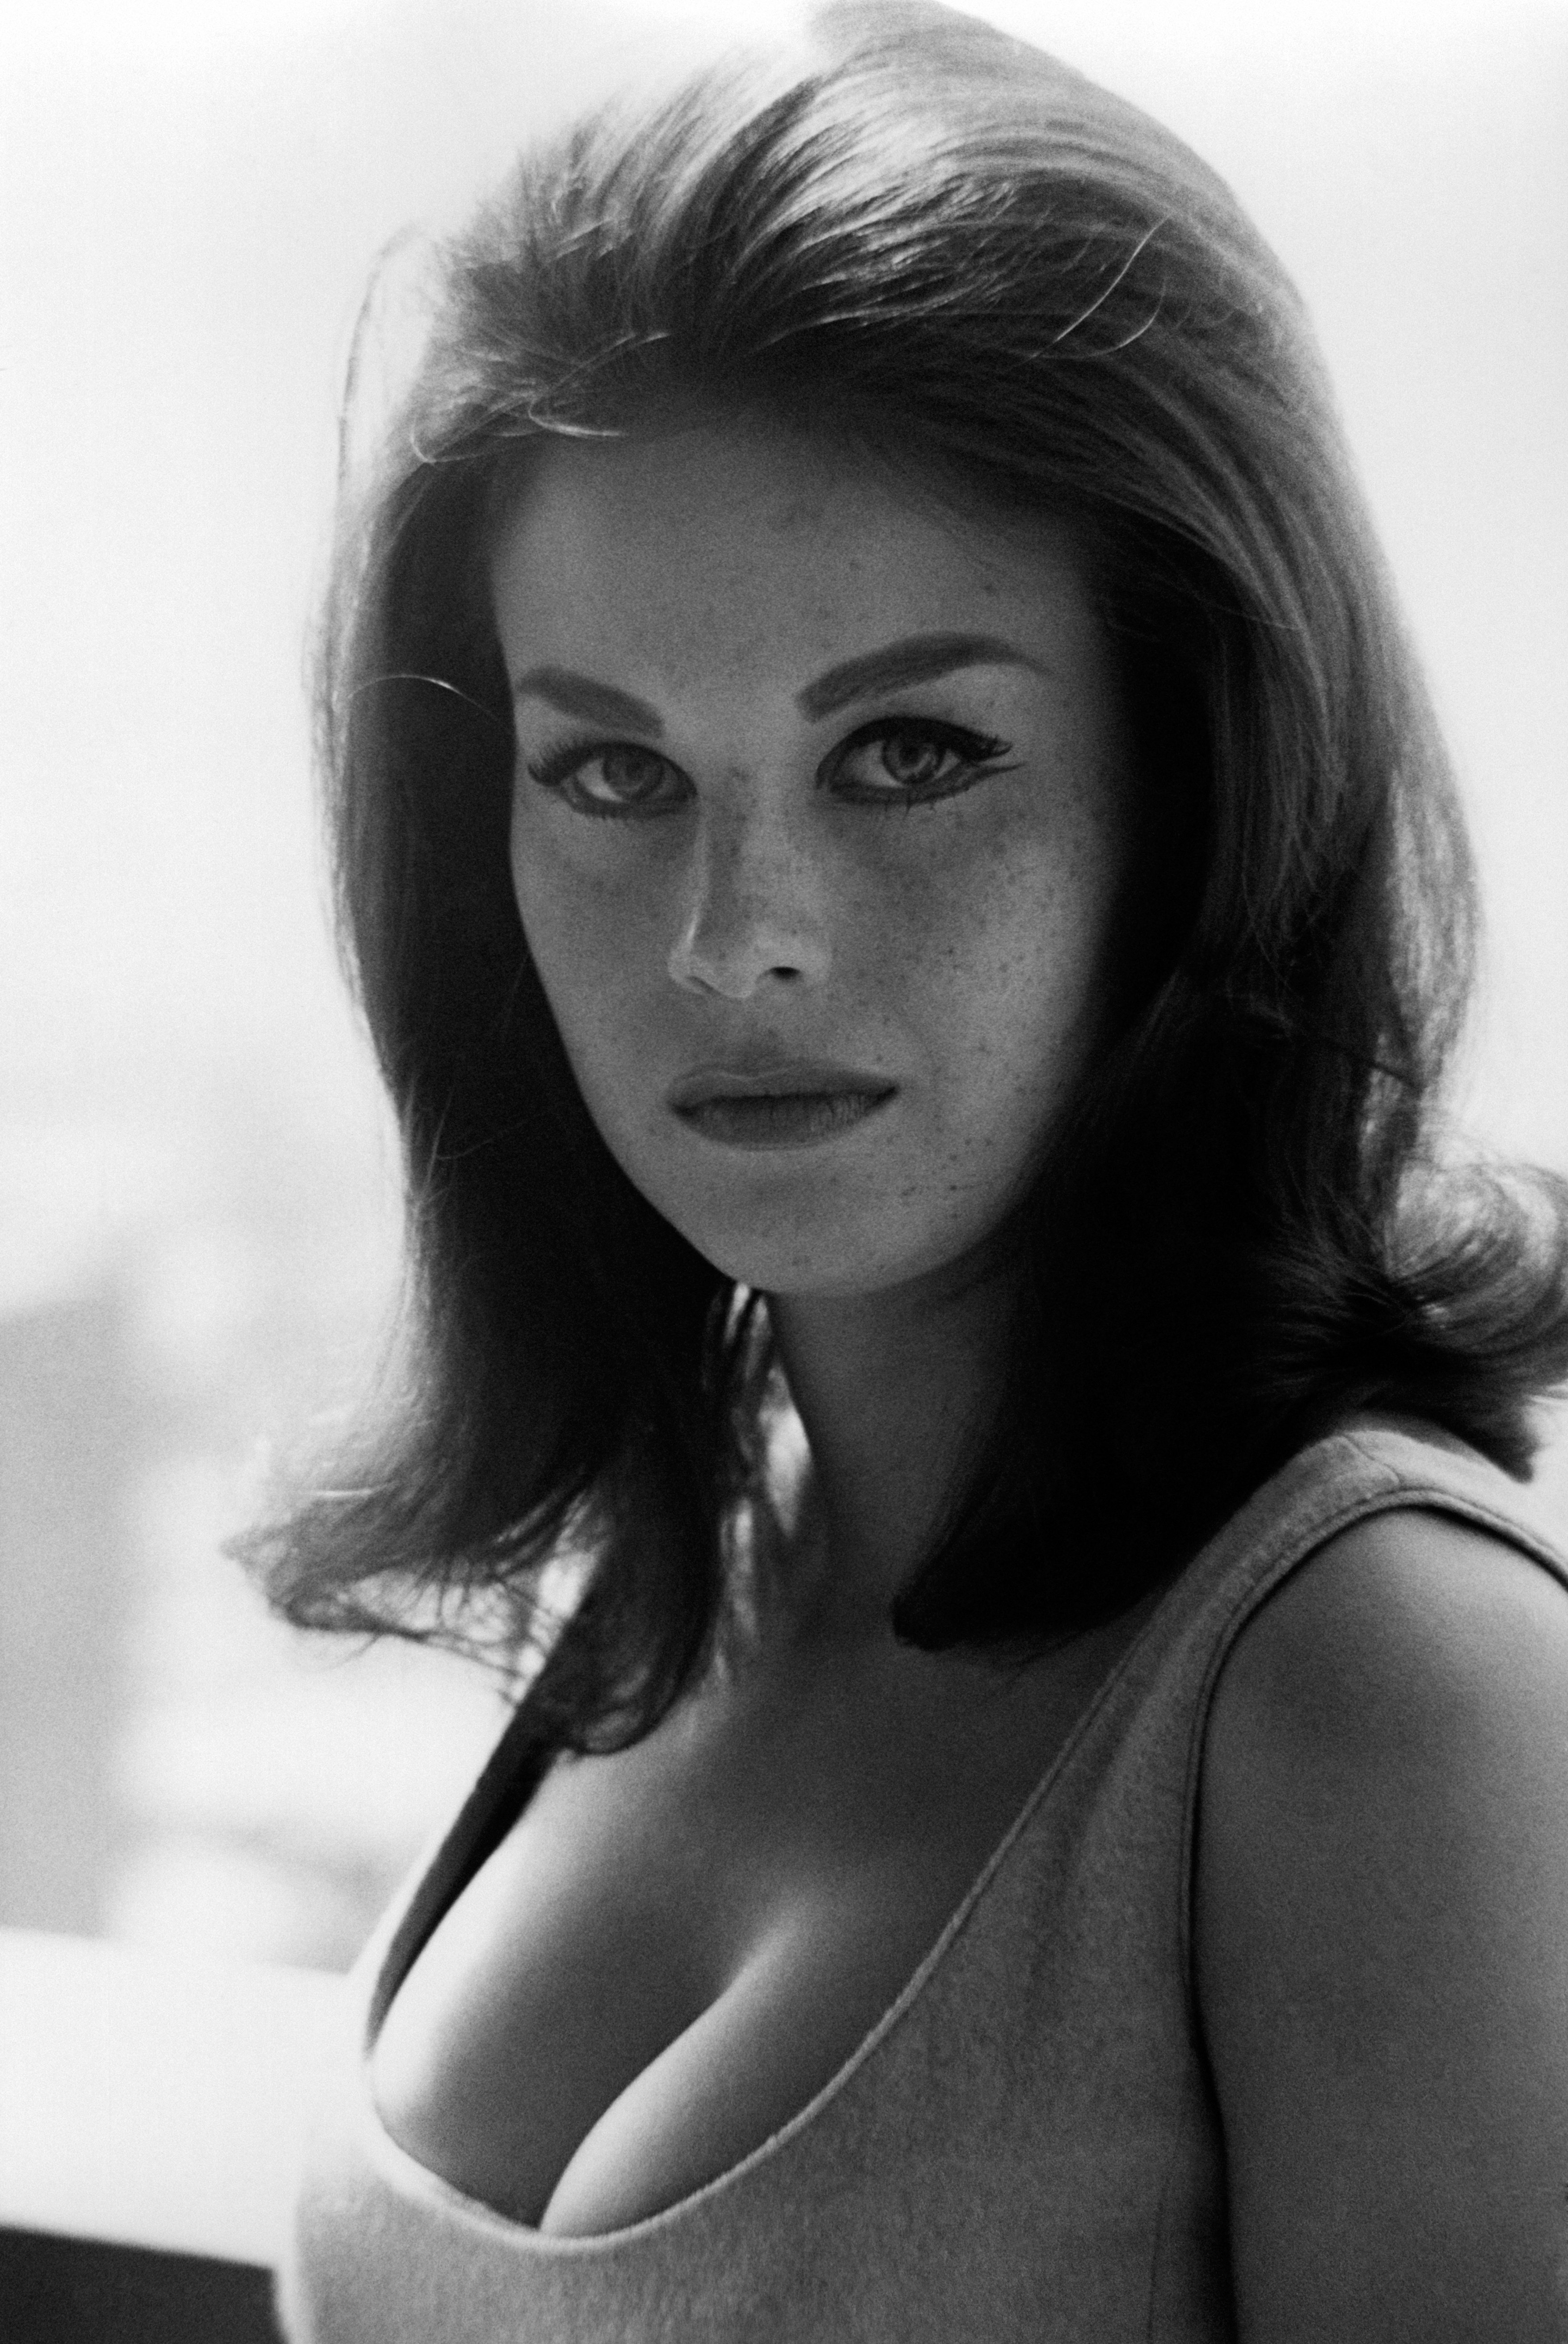 A black and white portrait of former child actress, Lana Wood in 1966 in the United States | Source: Getty Images